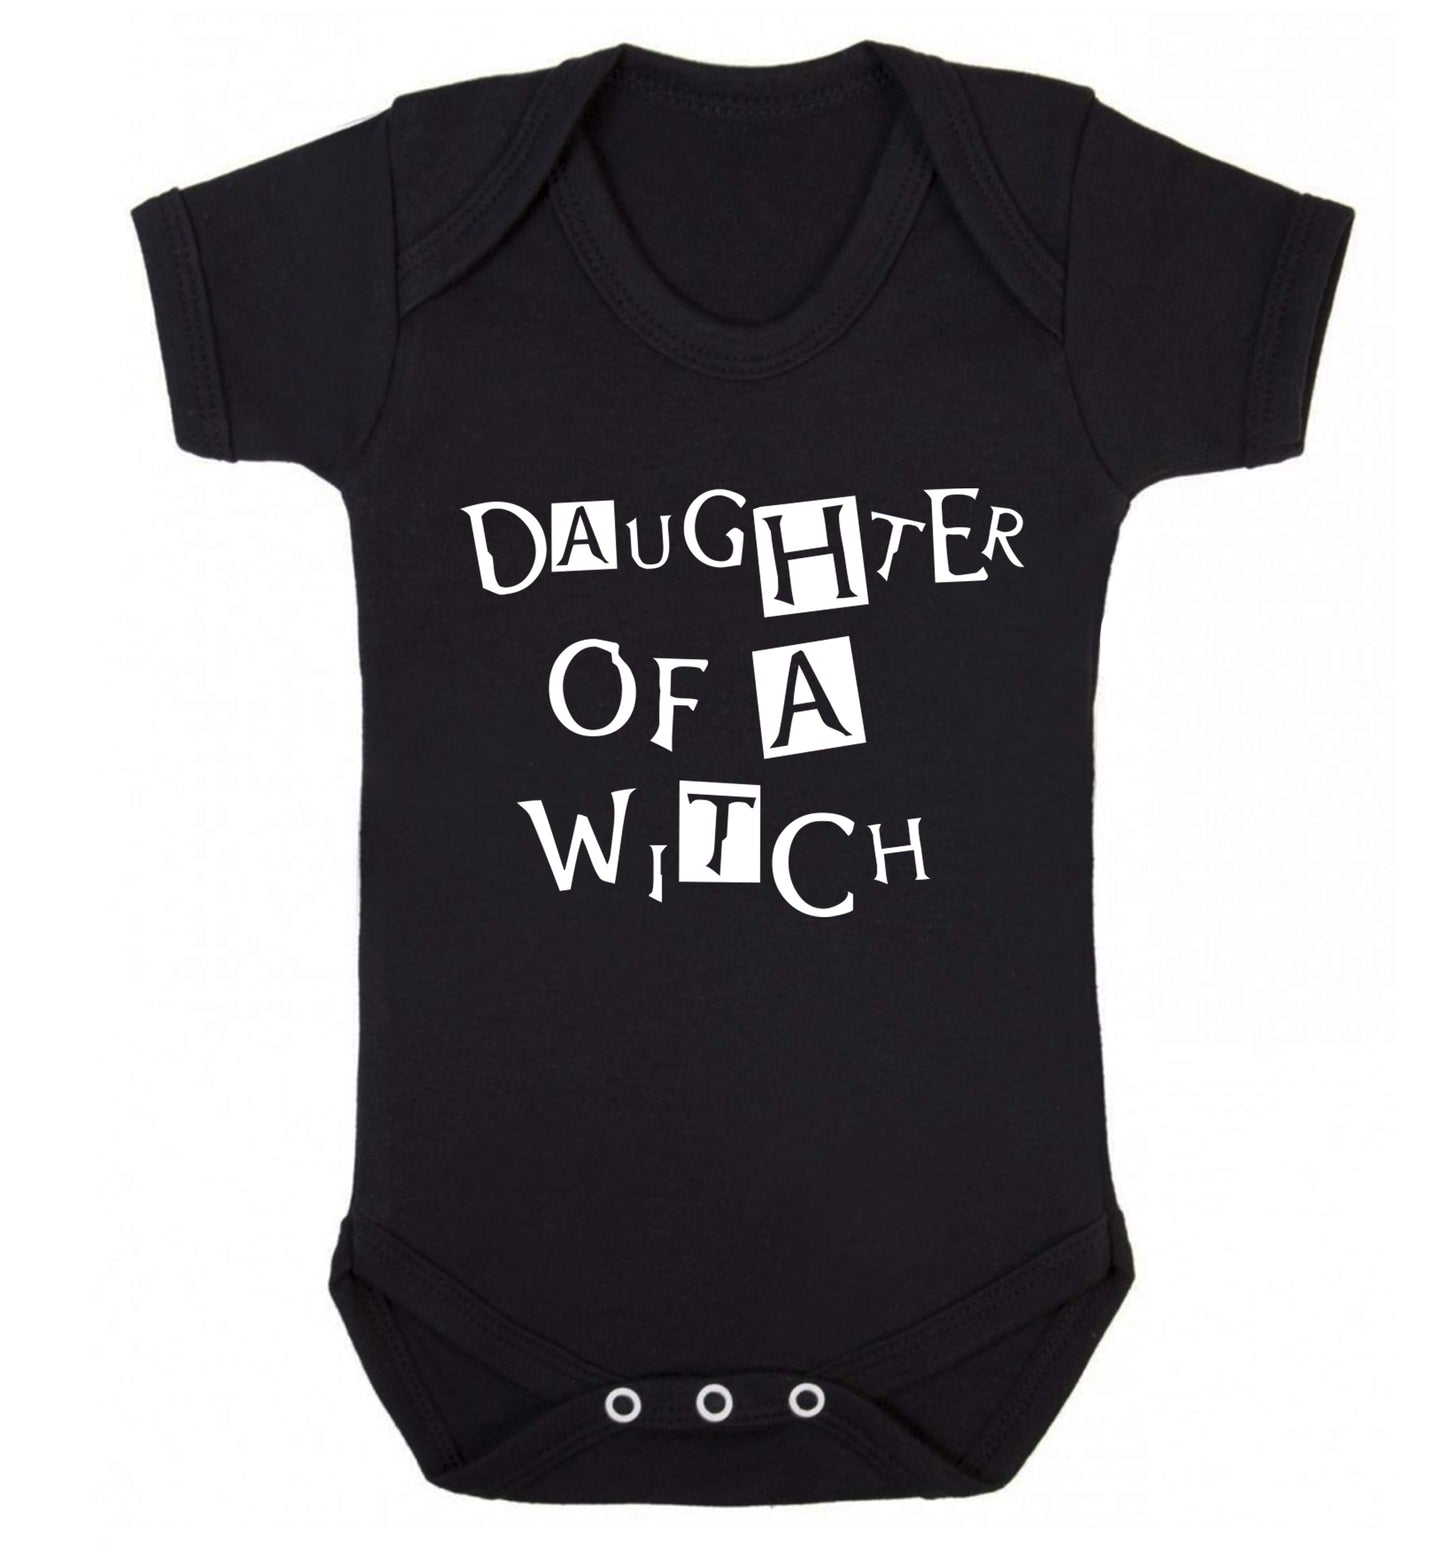 Daughter of a witch Baby Vest black 18-24 months